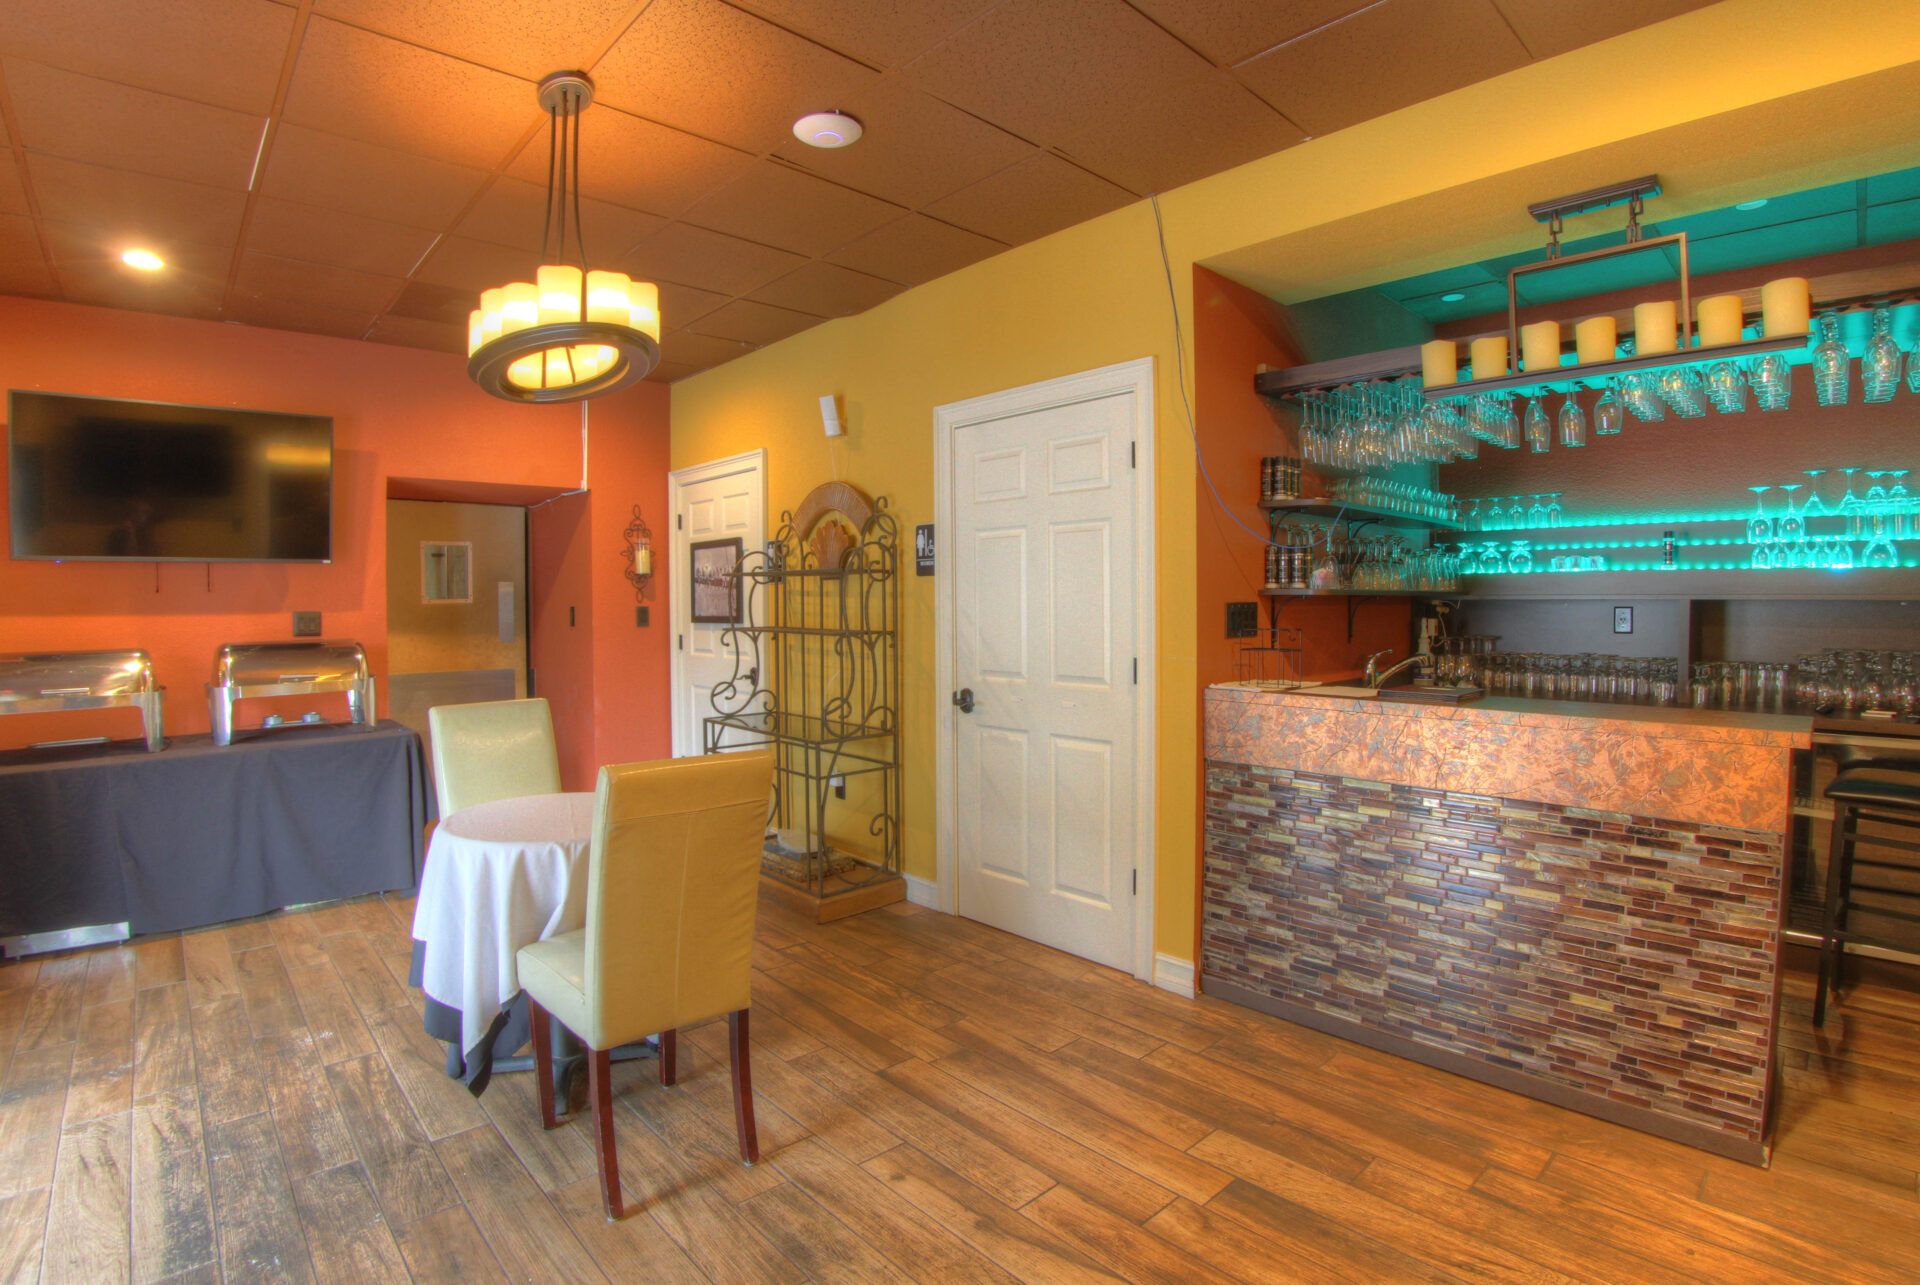 Bricked bar area overlooking a two-person table in a yellow and orange-painted room